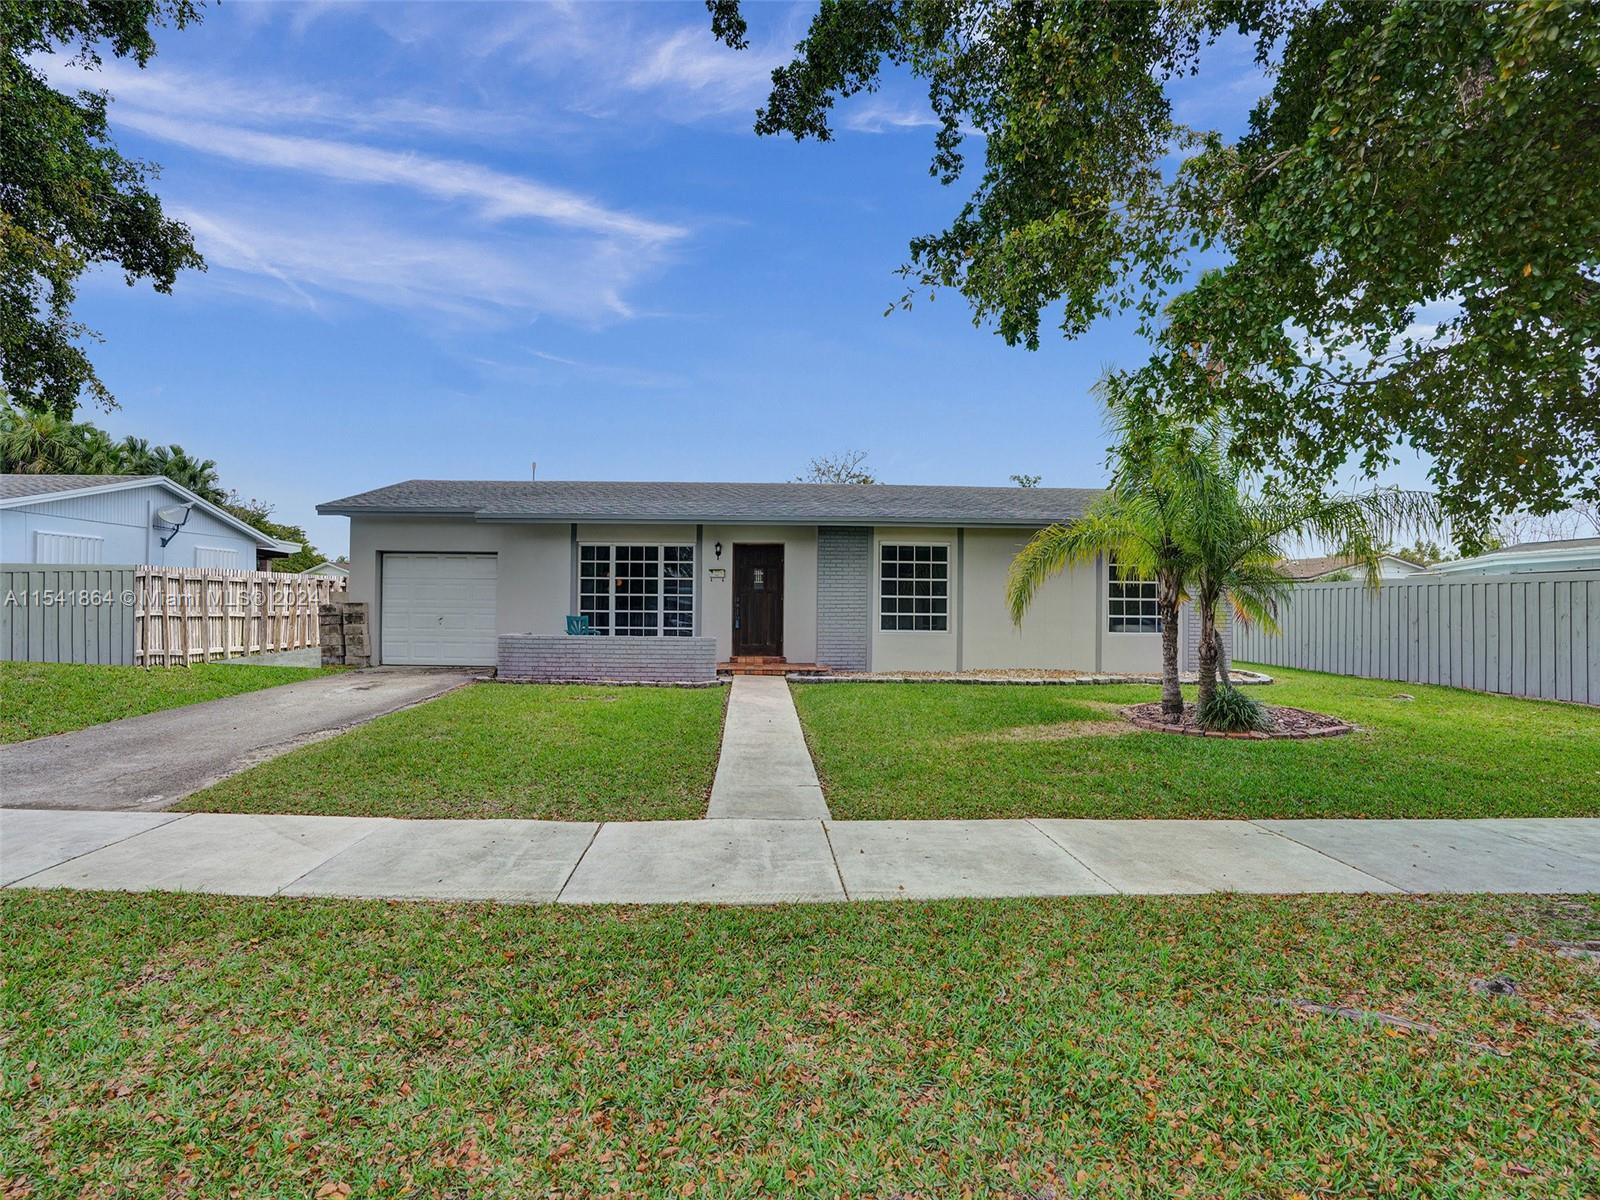 *** GREAT COMBINATION OF FOUR-BEDROOM, TWO BATHROOMS, LARGE FAMILY ROOM ON OVERSIZED 12,000 SQUARE-FOOT LOT *** ONE-CAR GARAGE HAS BEEN CHANGED TO UTILITY AREA THAT ACCOMMODATES AVERAGE GOLF CART SIZE AND MORE STORAGE *** THE ROOF WAS RECENTLY CHANGED IN 2019 AND LOCATED IN  RECENTLY INCORPORATED PALMETTO BAY, CLOSE TO VILLAGE TOWN HALL, SCHOOLS, AND POPULAR BLACK POINT MARINA *** YES, ROOM FOR THE BOATS & MORE ***